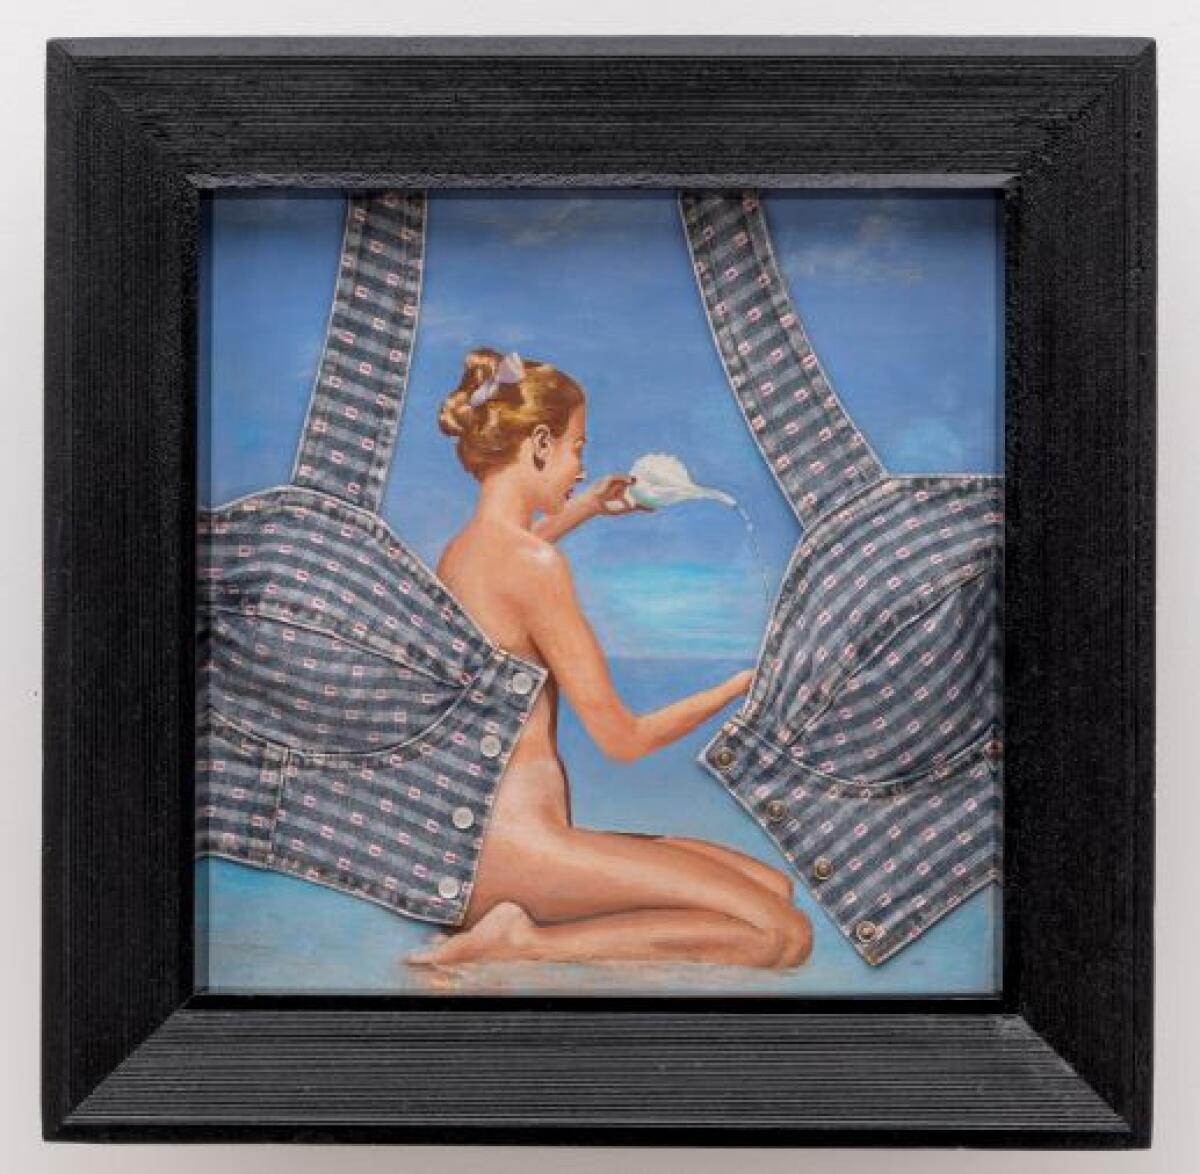 A kneeling naked woman pours water in a collage that also features an unbuttoned women's top.